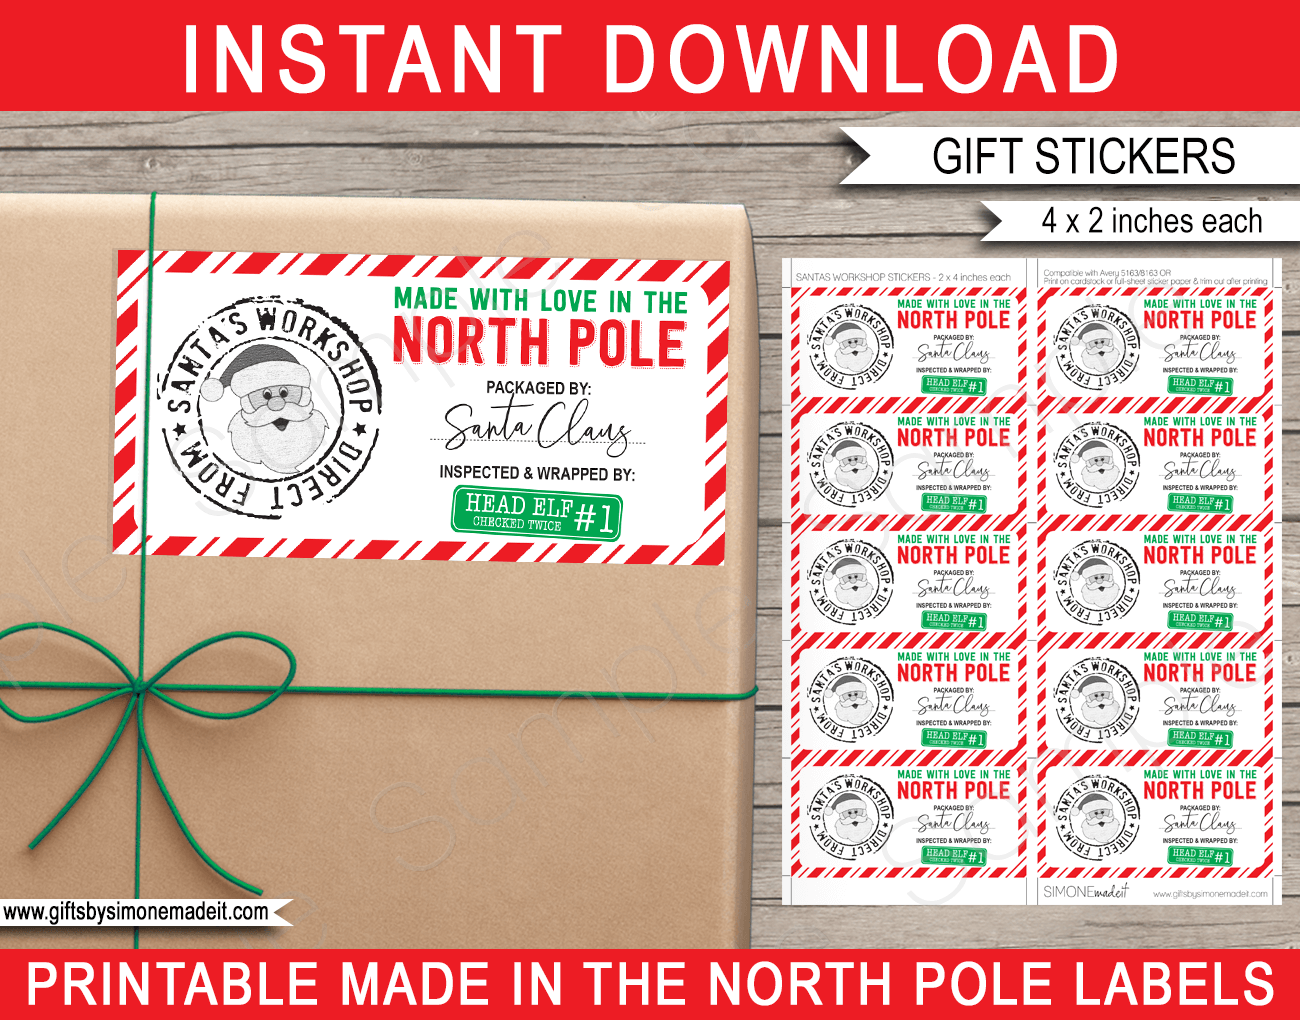 Made in the North Pole Labels Template Packed by Santa Claus Stickers